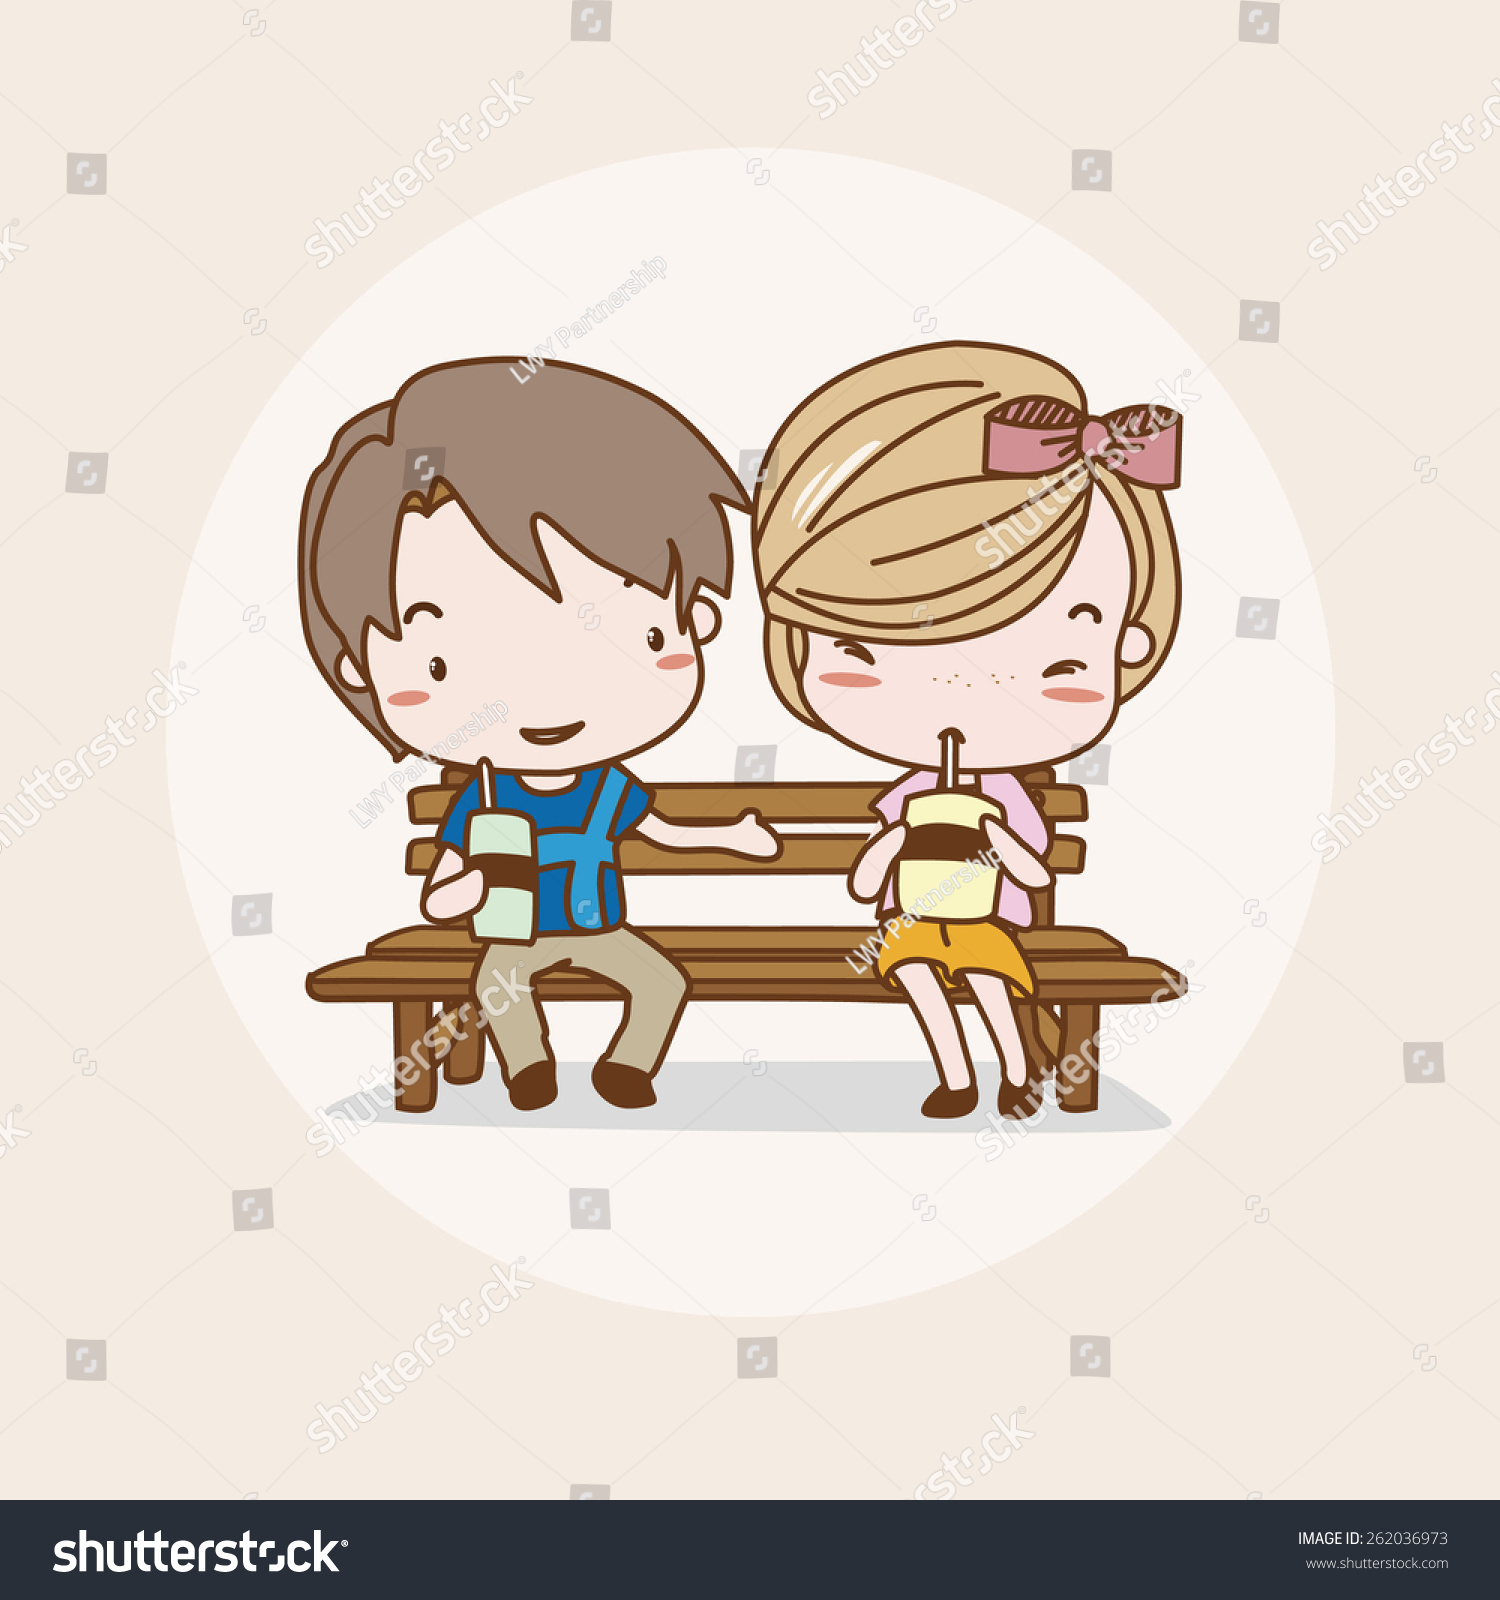 online dating clipart - photo #1